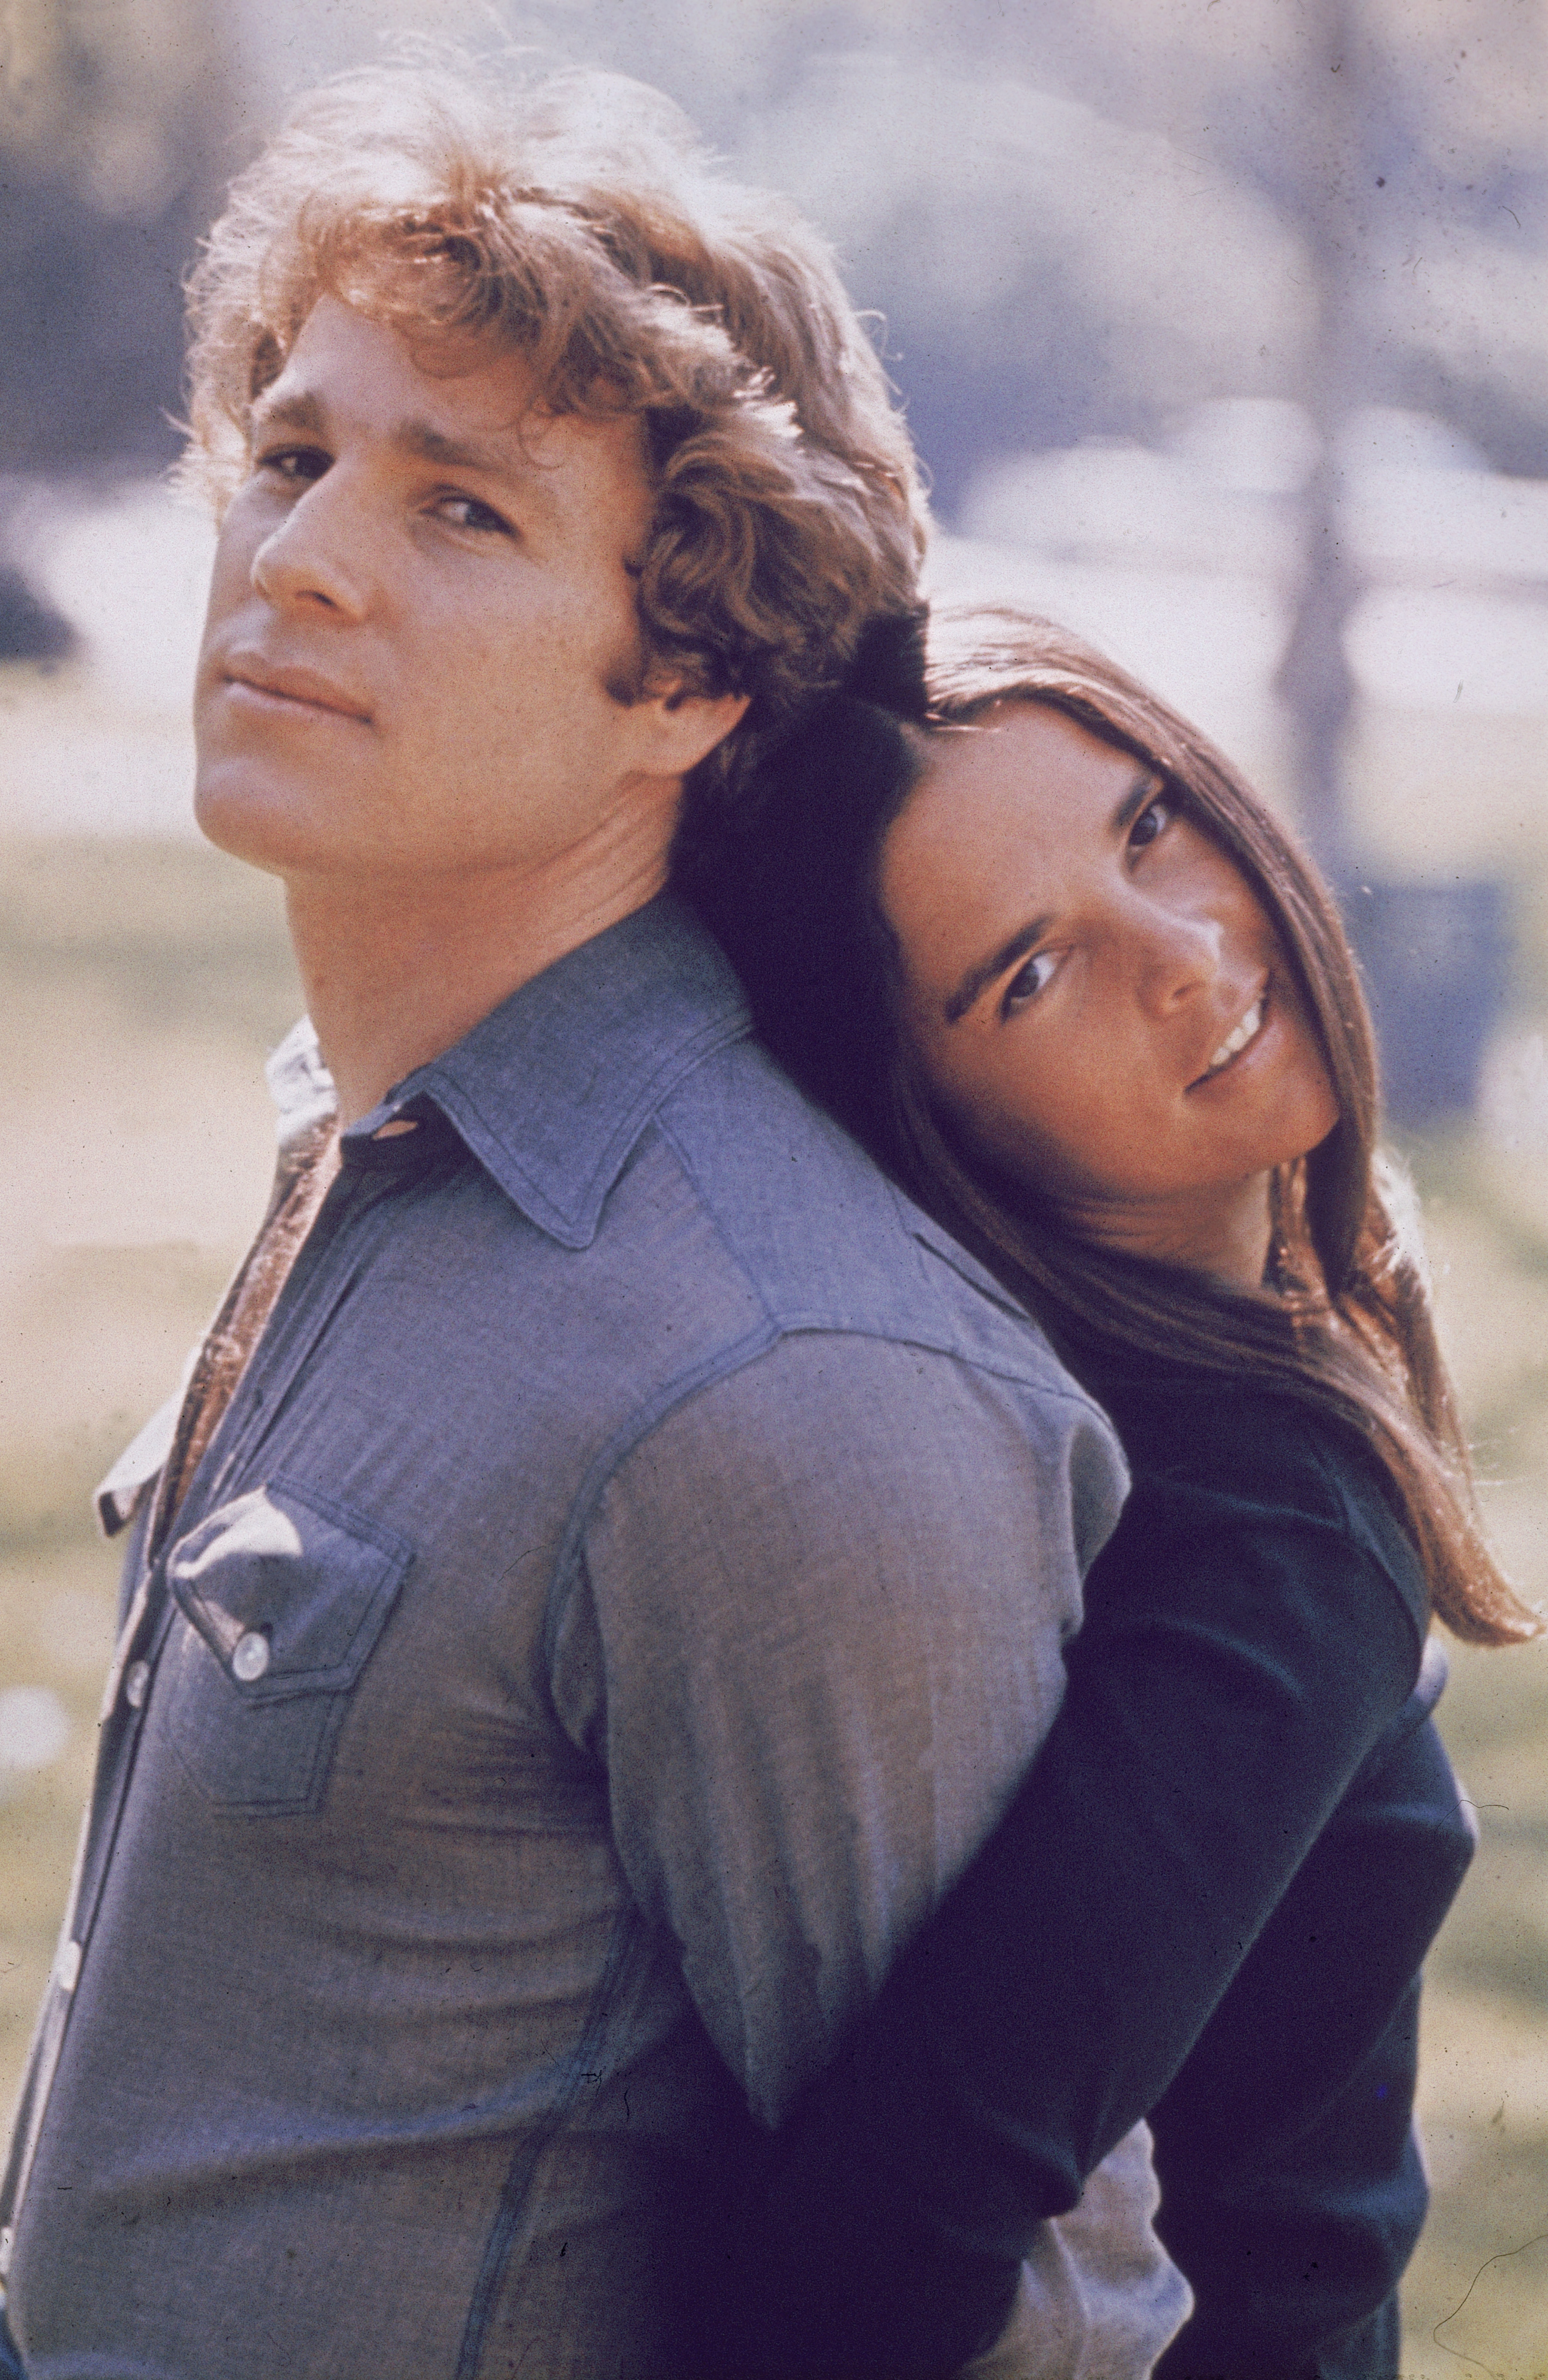 Ryan O'Neal and Ali MacGraw in a still from the film "Love Story," circa 1970 | Source: Getty Images